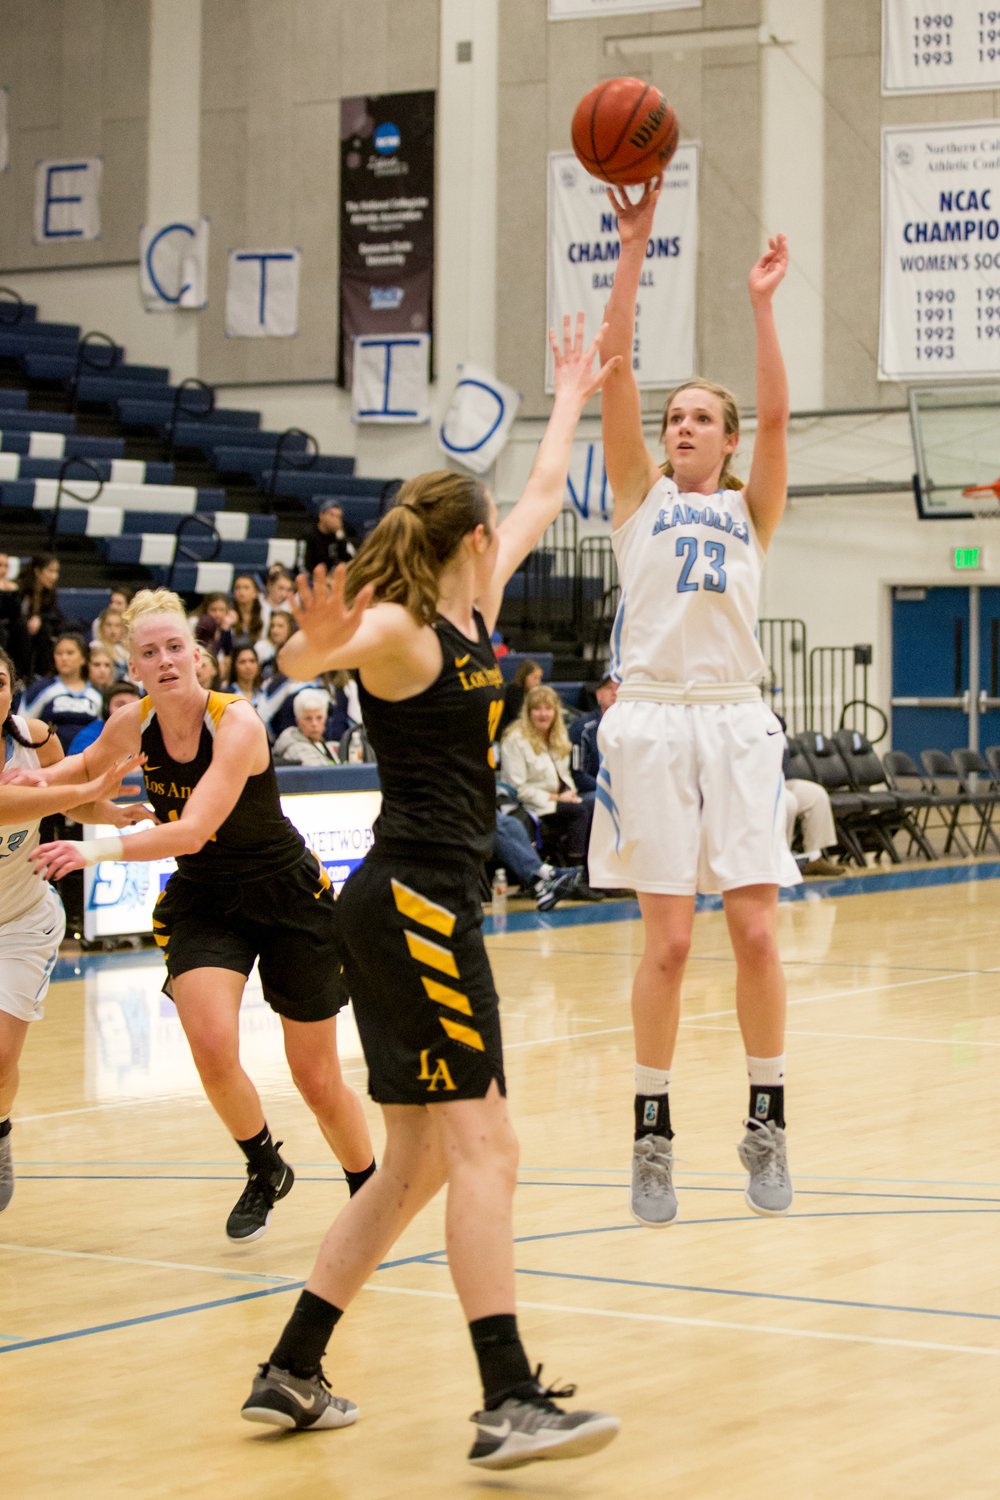 a player from Sonoma State's Women's Basketball team shooting the basketball for the hoop during a game